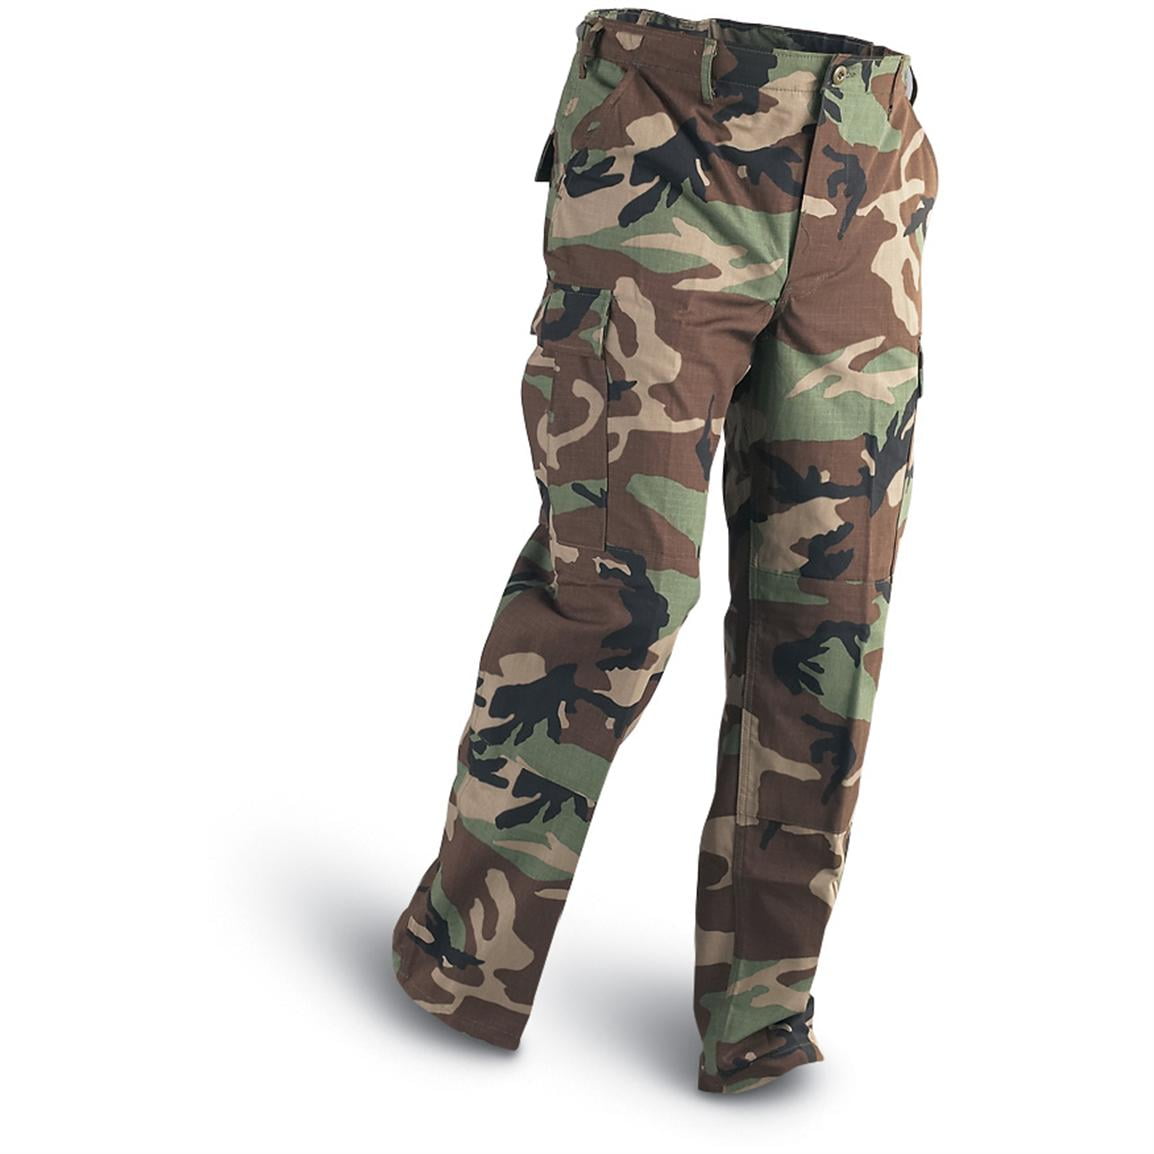 US Military Spec BDU Tactical Pants, 100% Cotton Rip Stop, Camouflage ...